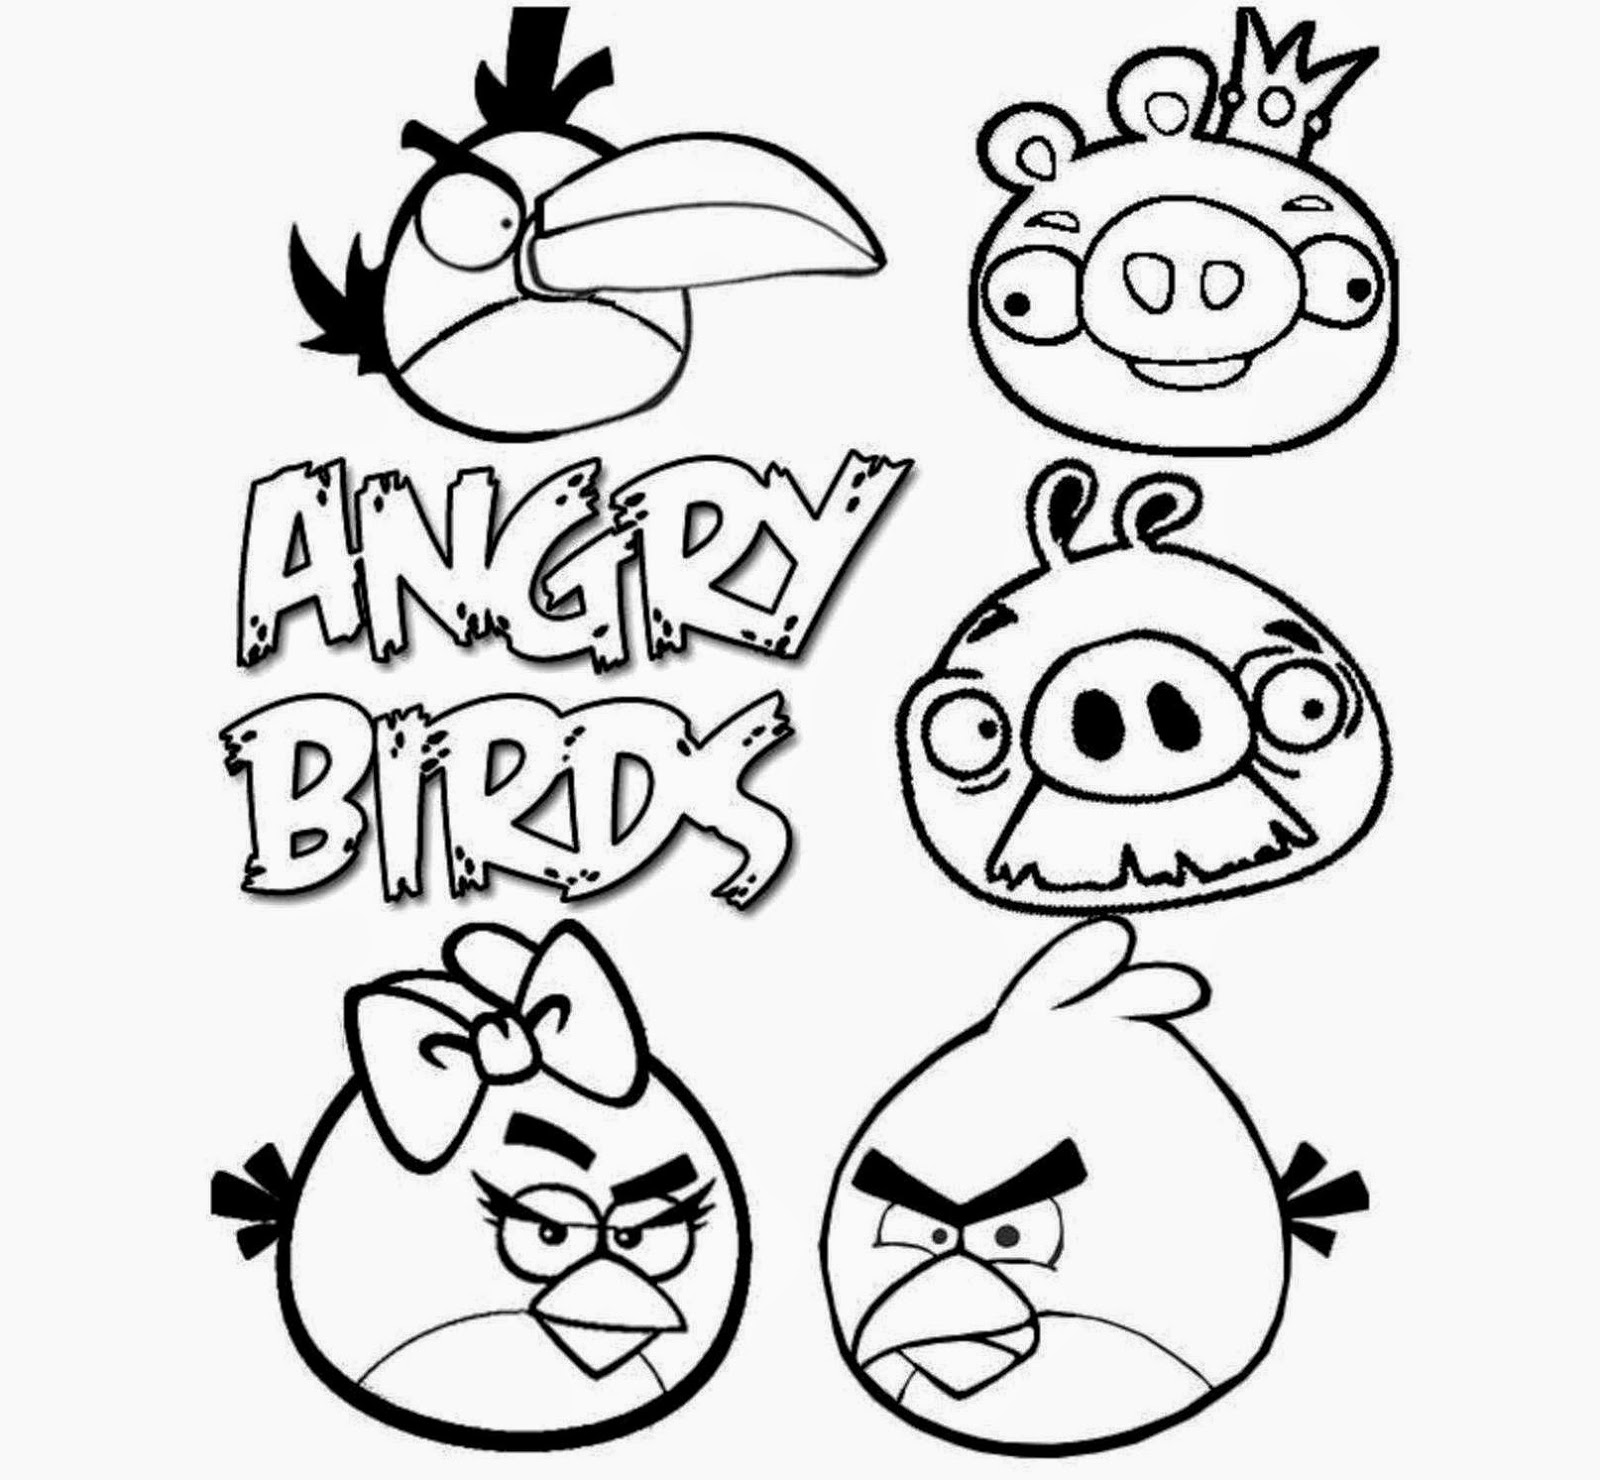 angry bird sketch